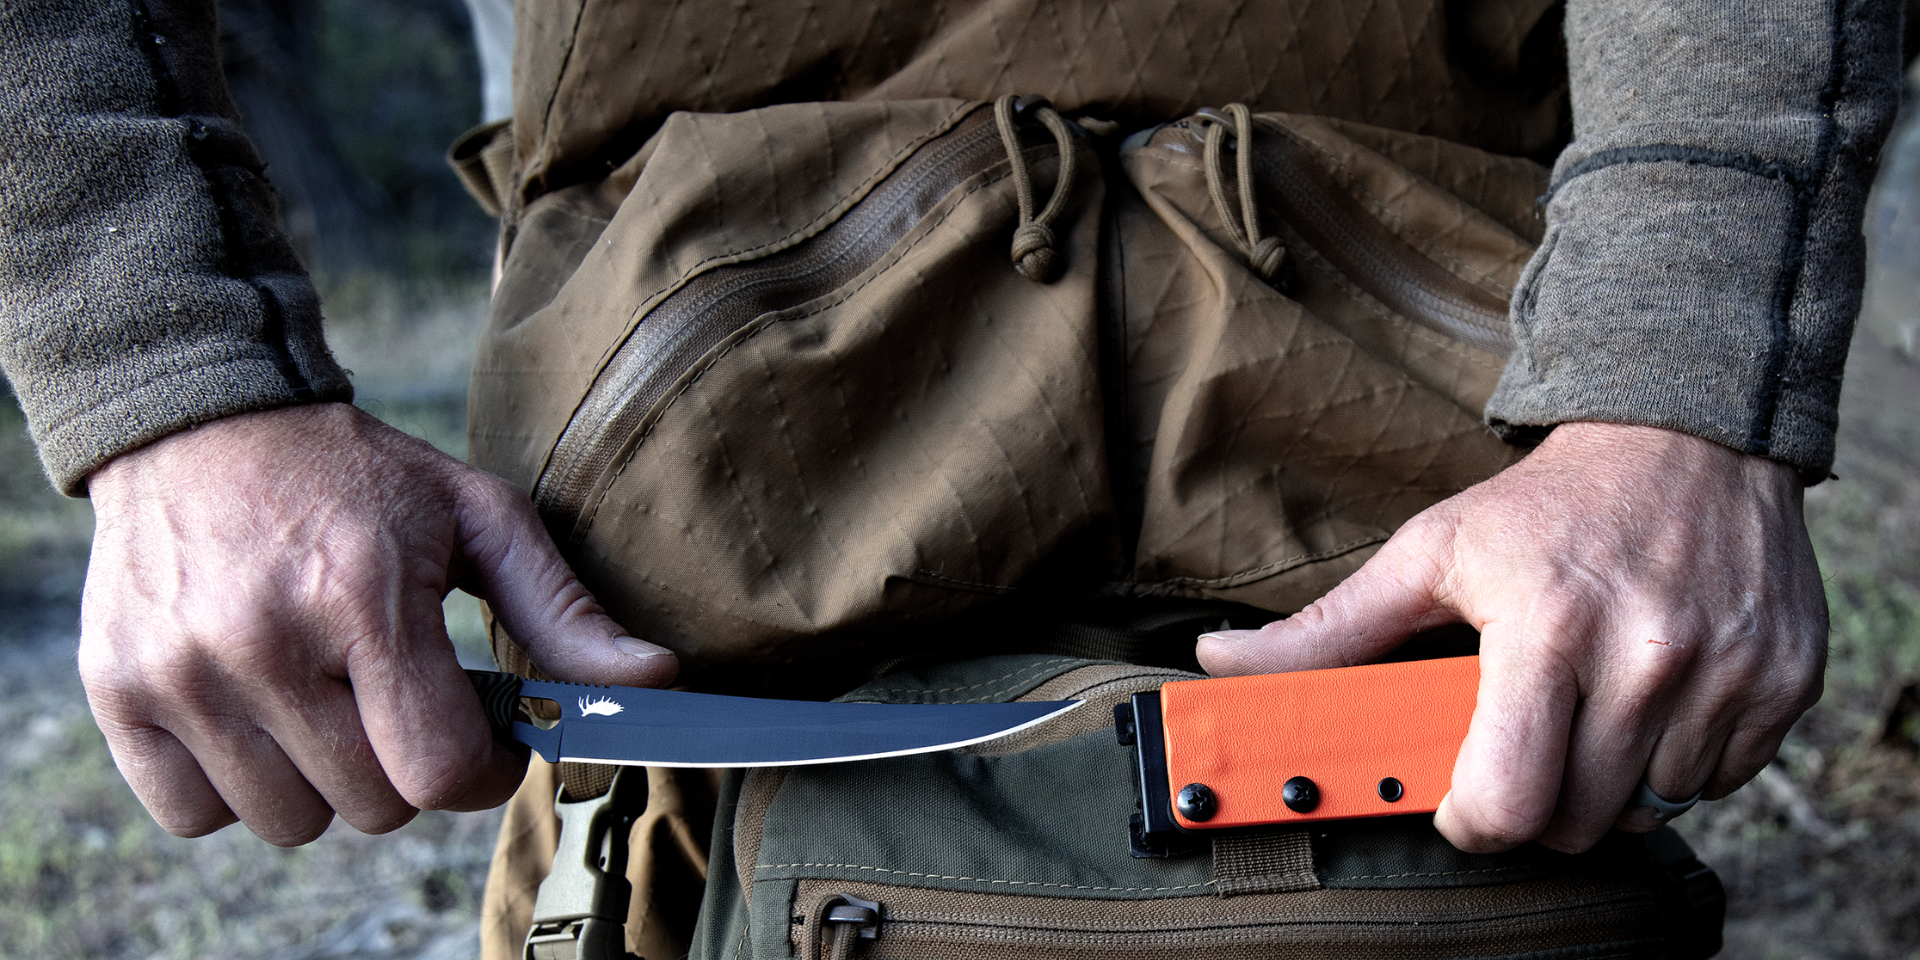 K3 Ultralight Boning Knife for Bow Hunters being unsheathed over a backpack